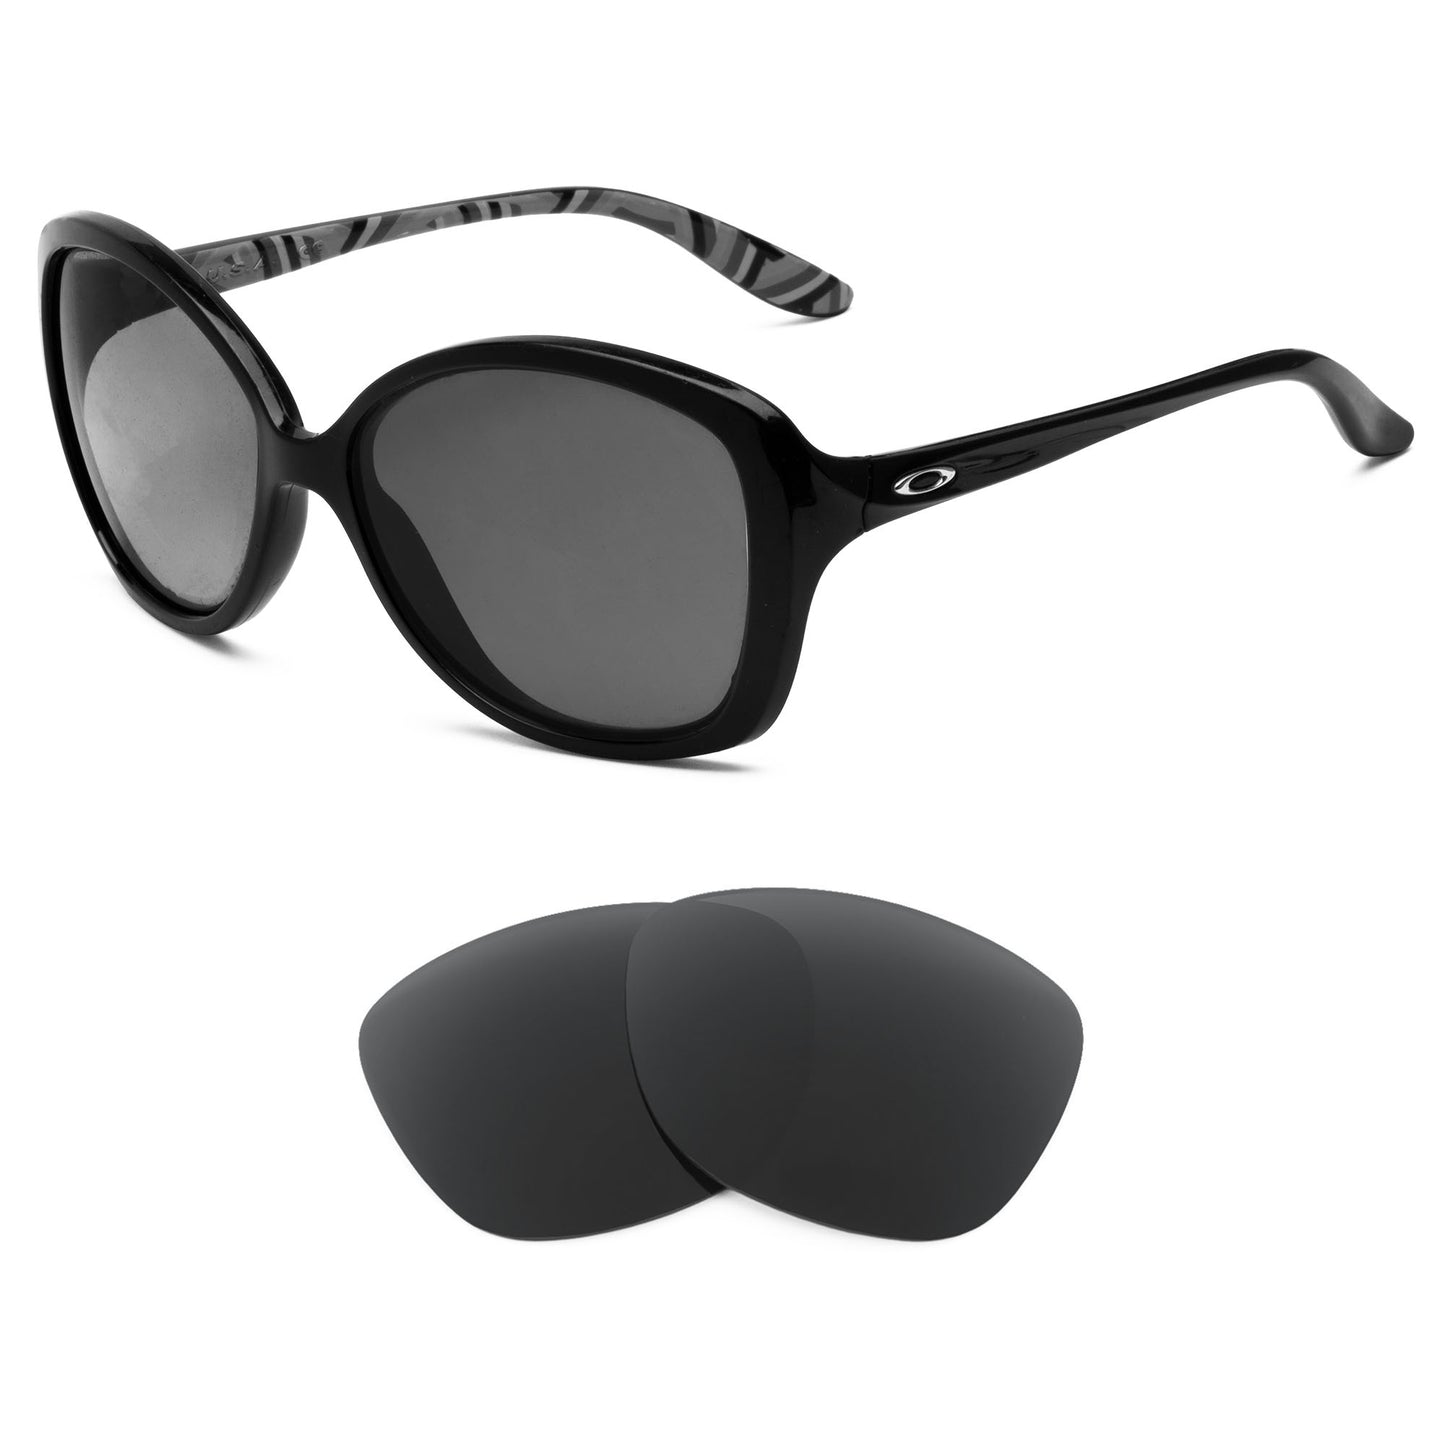 Oakley Sweet Spot sunglasses with replacement lenses